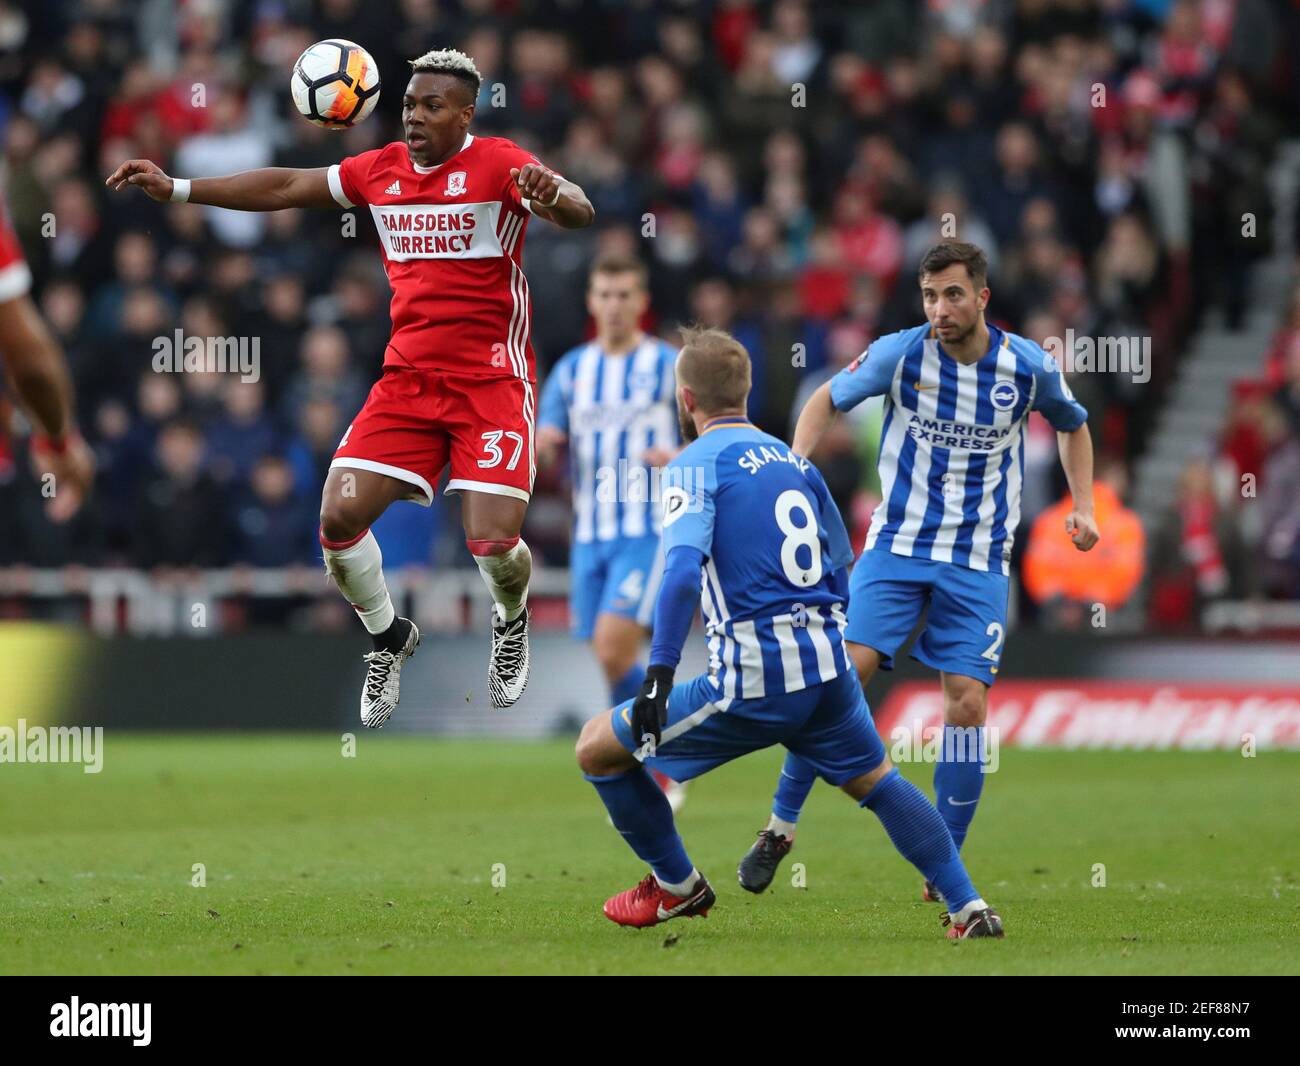 Soccer Football - FA Cup Fourth Round - Middlesbrough vs Brighton & Hove Albion - Riverside Stadium, Middlesbrough, Britain - January 27, 2018   Middlesbrough's Adama Traore in action with Brighton's Jiri Skalak and Markus Suttner   REUTERS/Scott Heppell Stock Photo